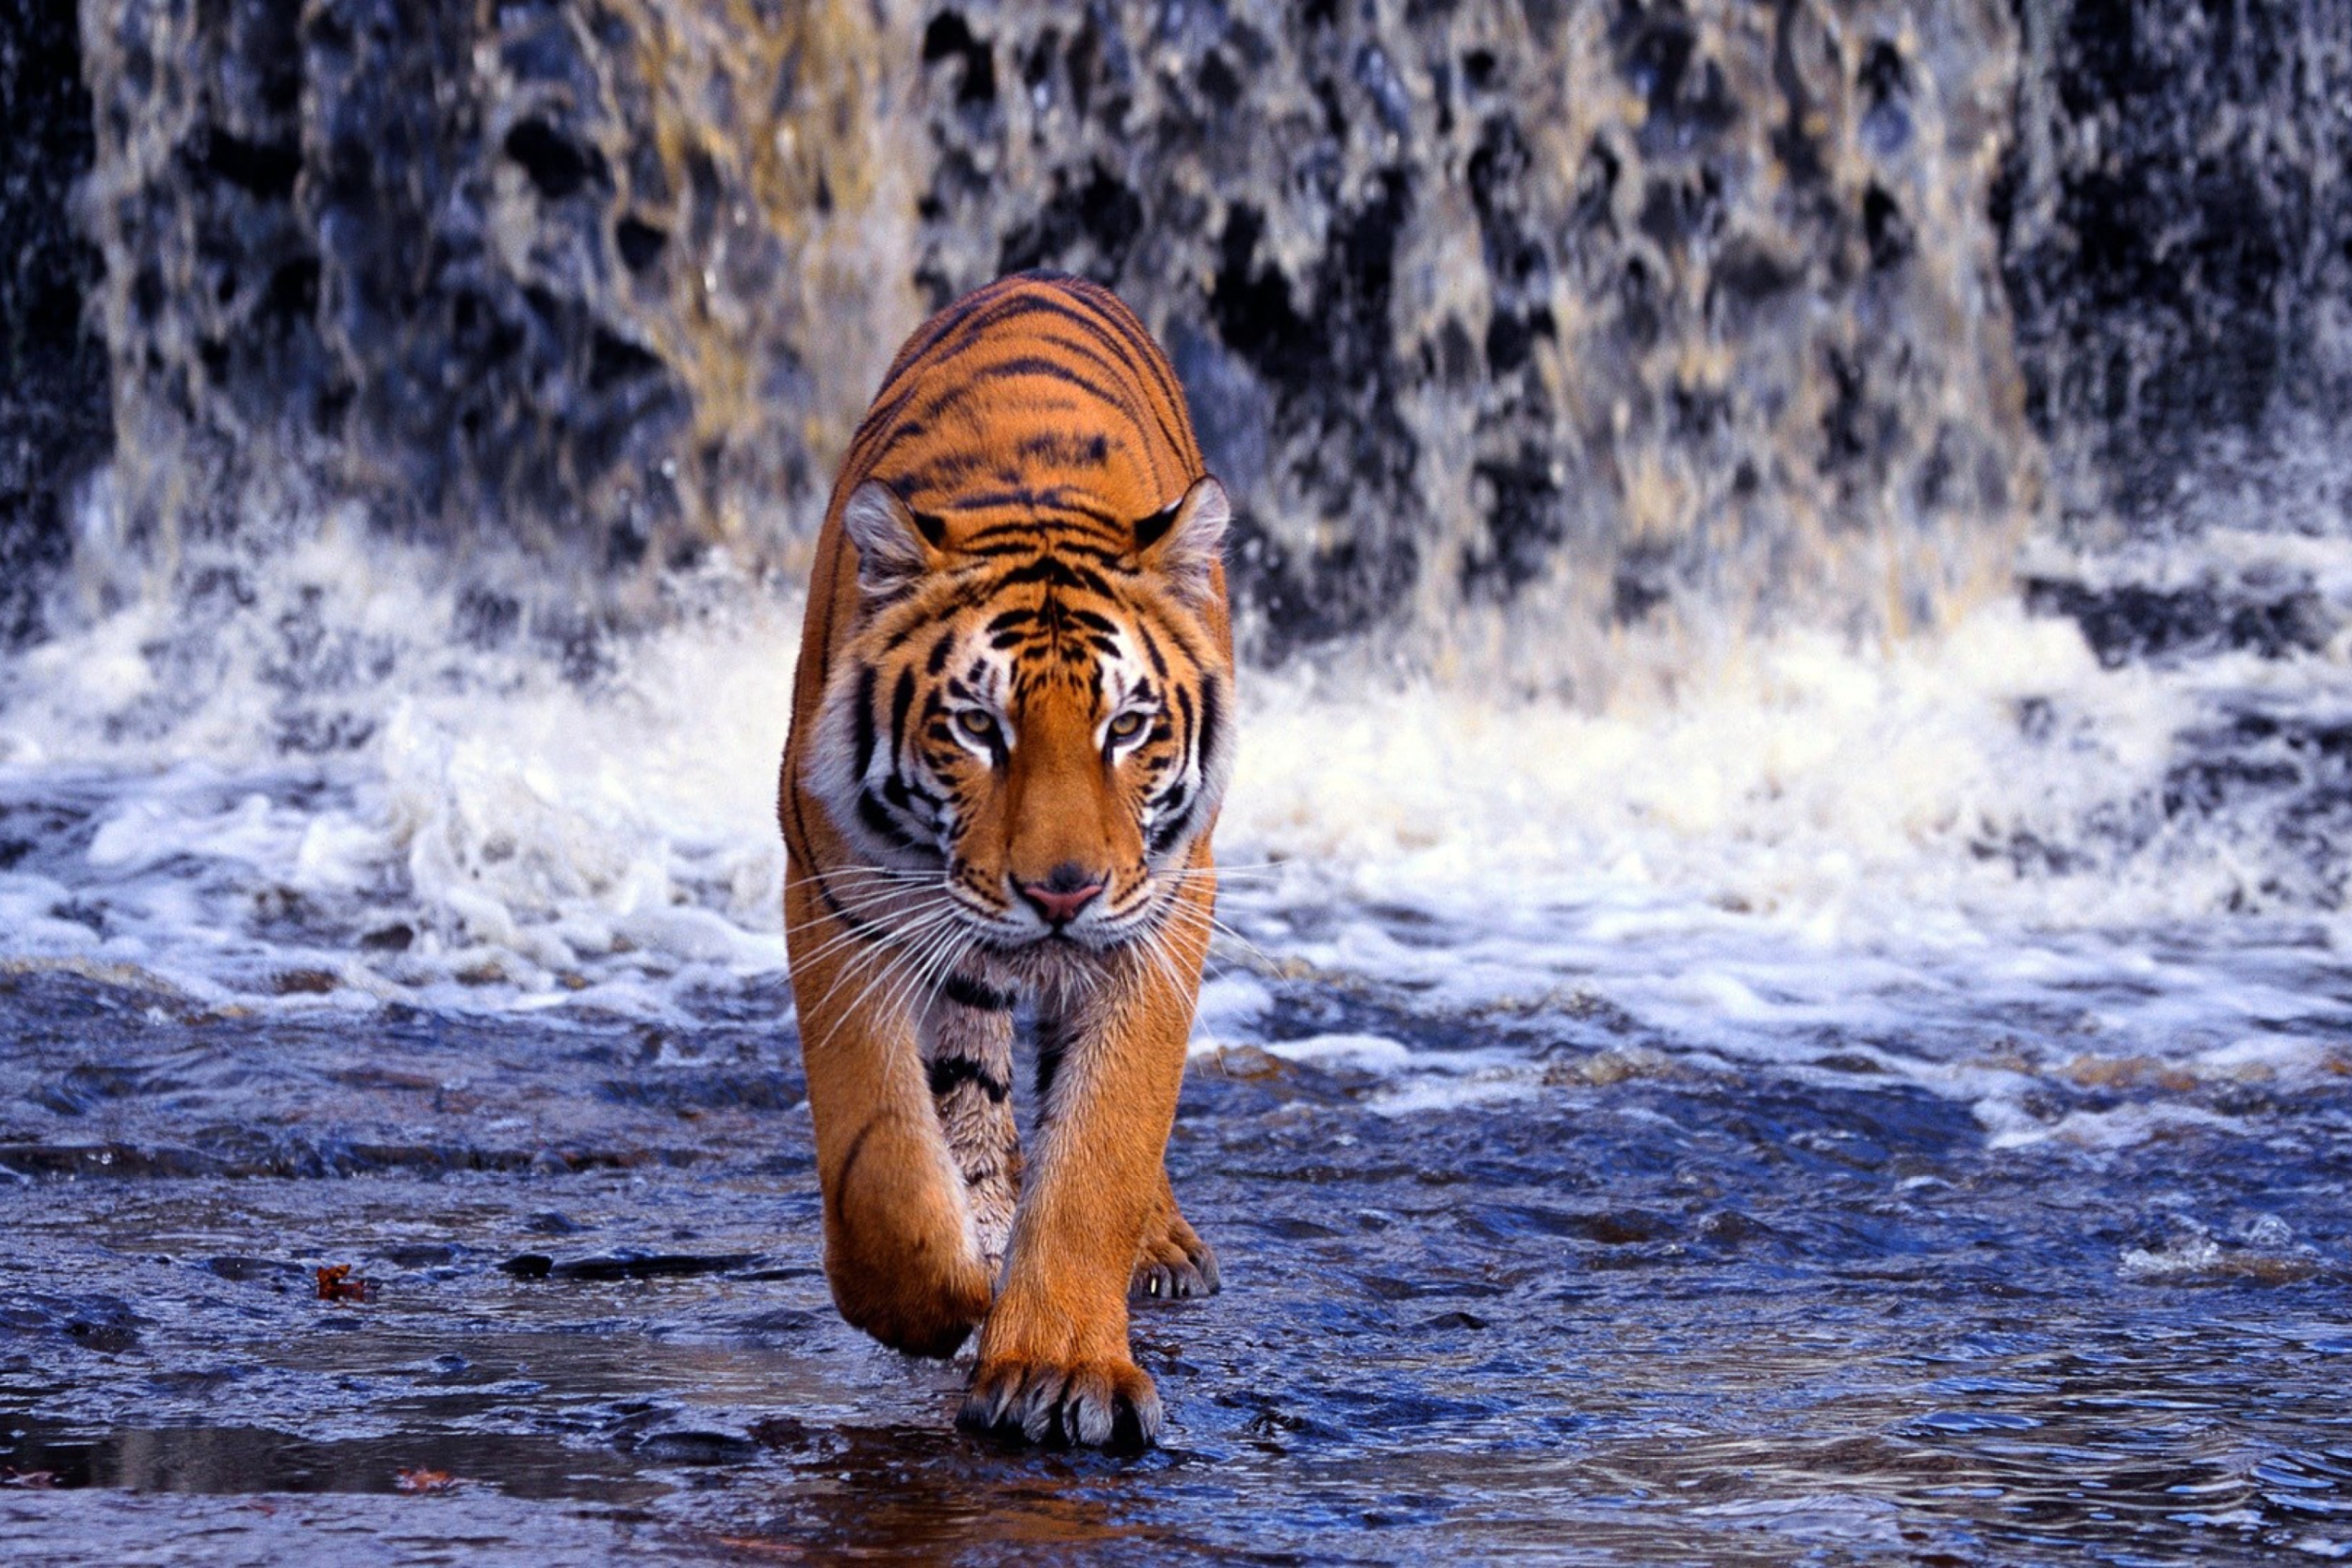 Tiger And Waterfall wallpaper 2880x1920